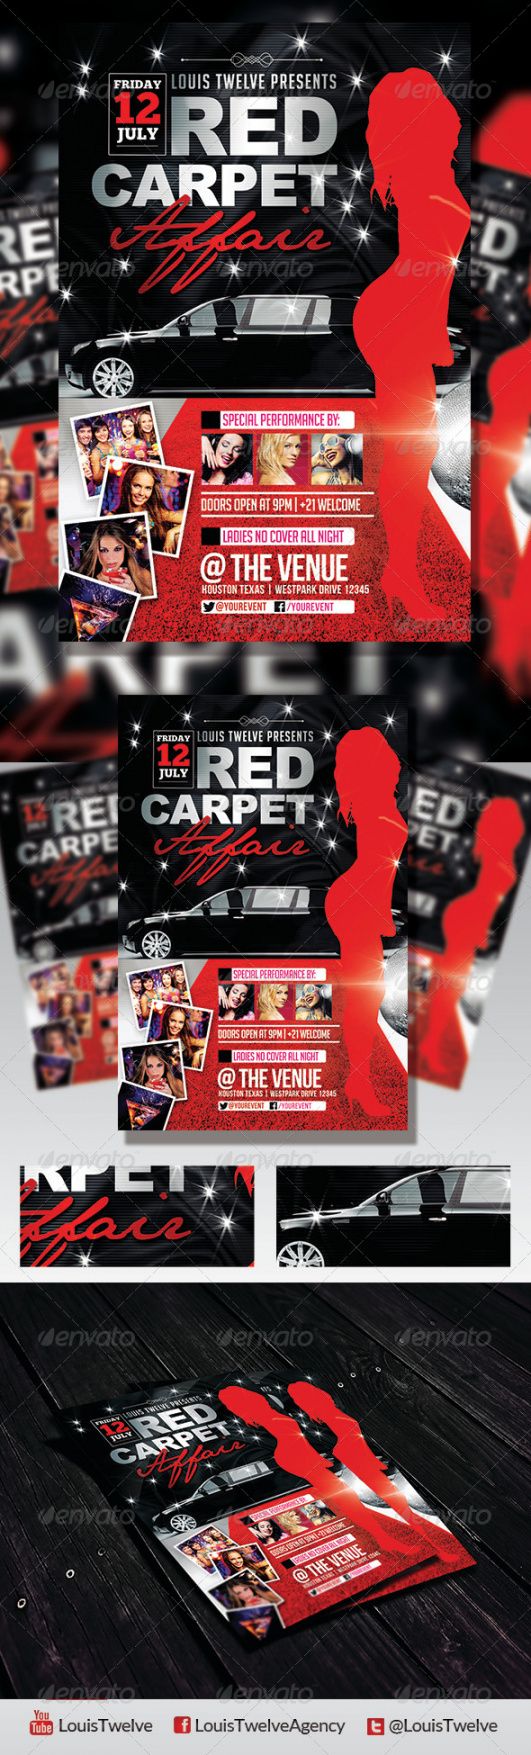 sample red carpet flyer graphics designs &amp; templates from graphicriver red carpet banner template